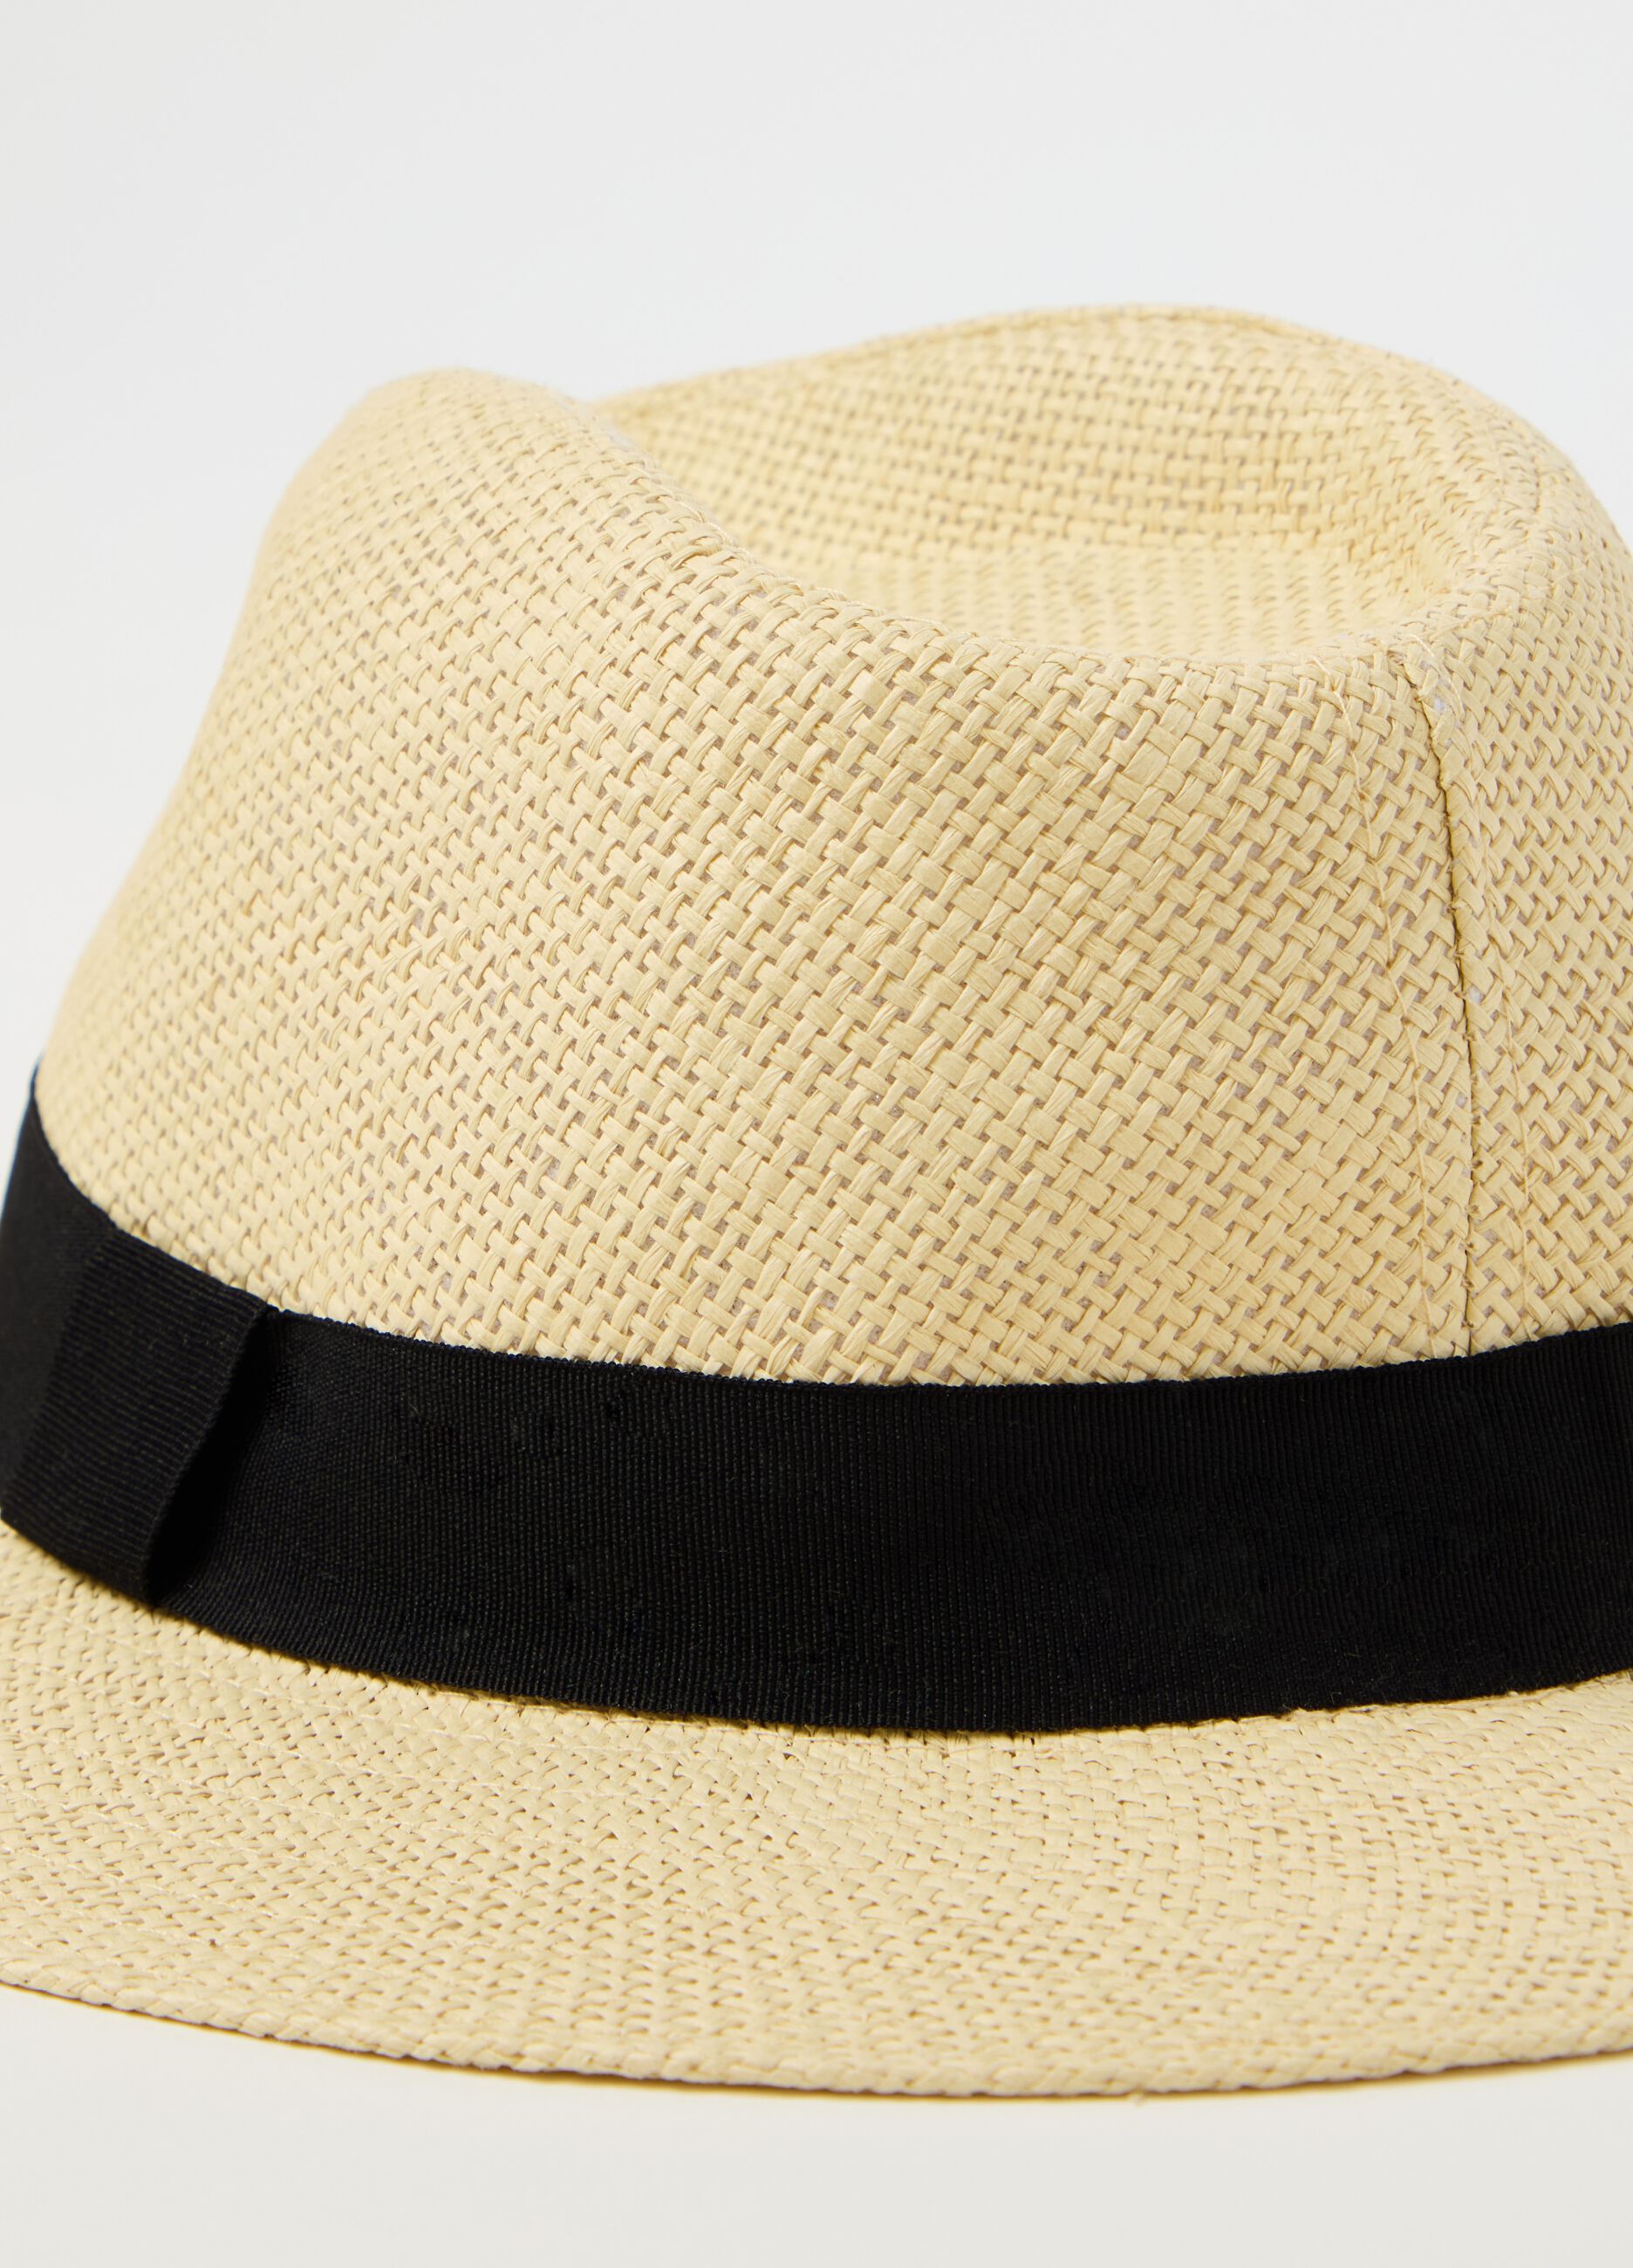 Panama hat with band